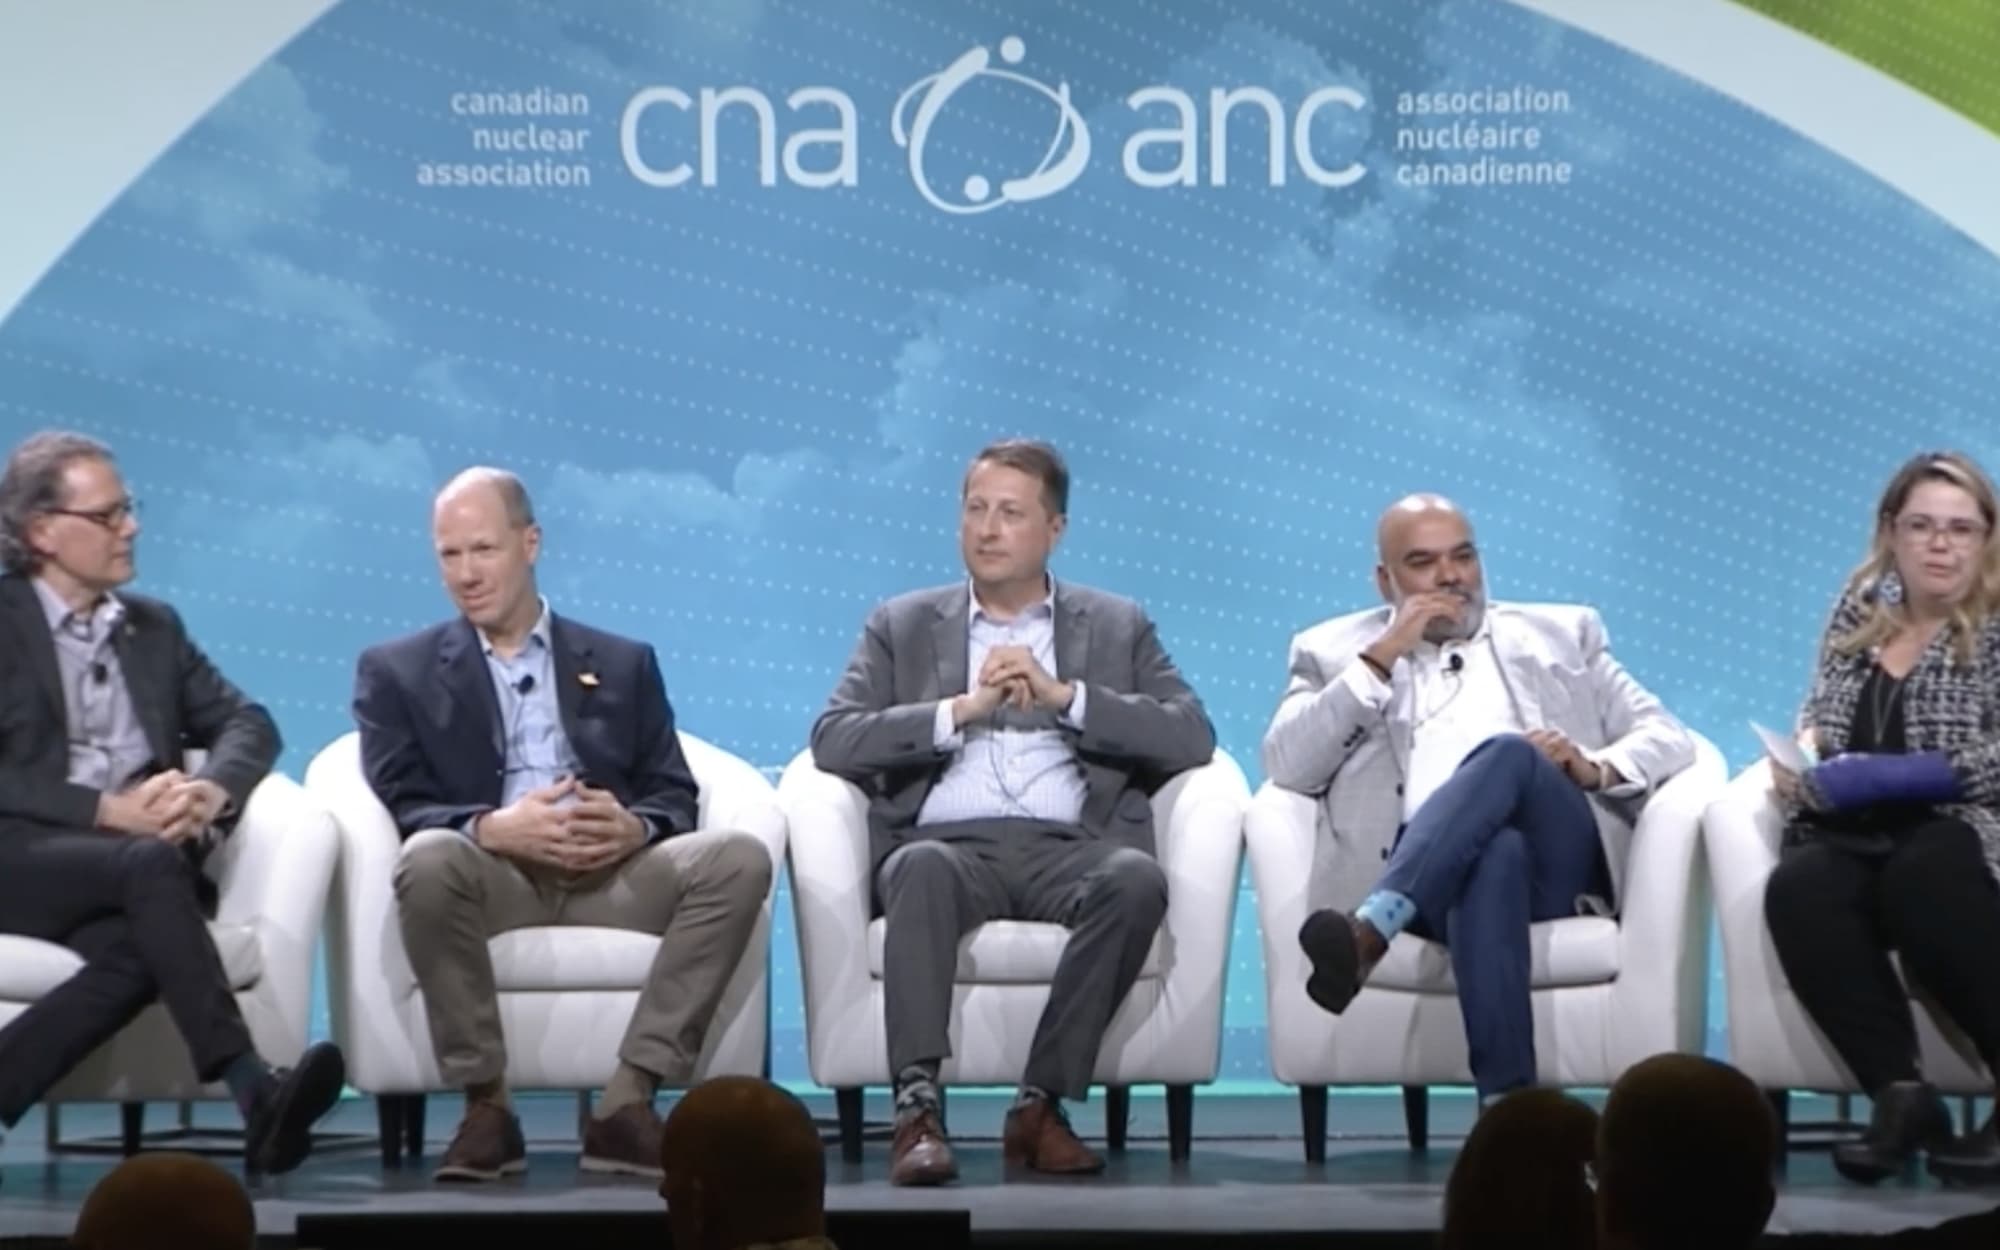 Watch the SMR panel at CNA2022